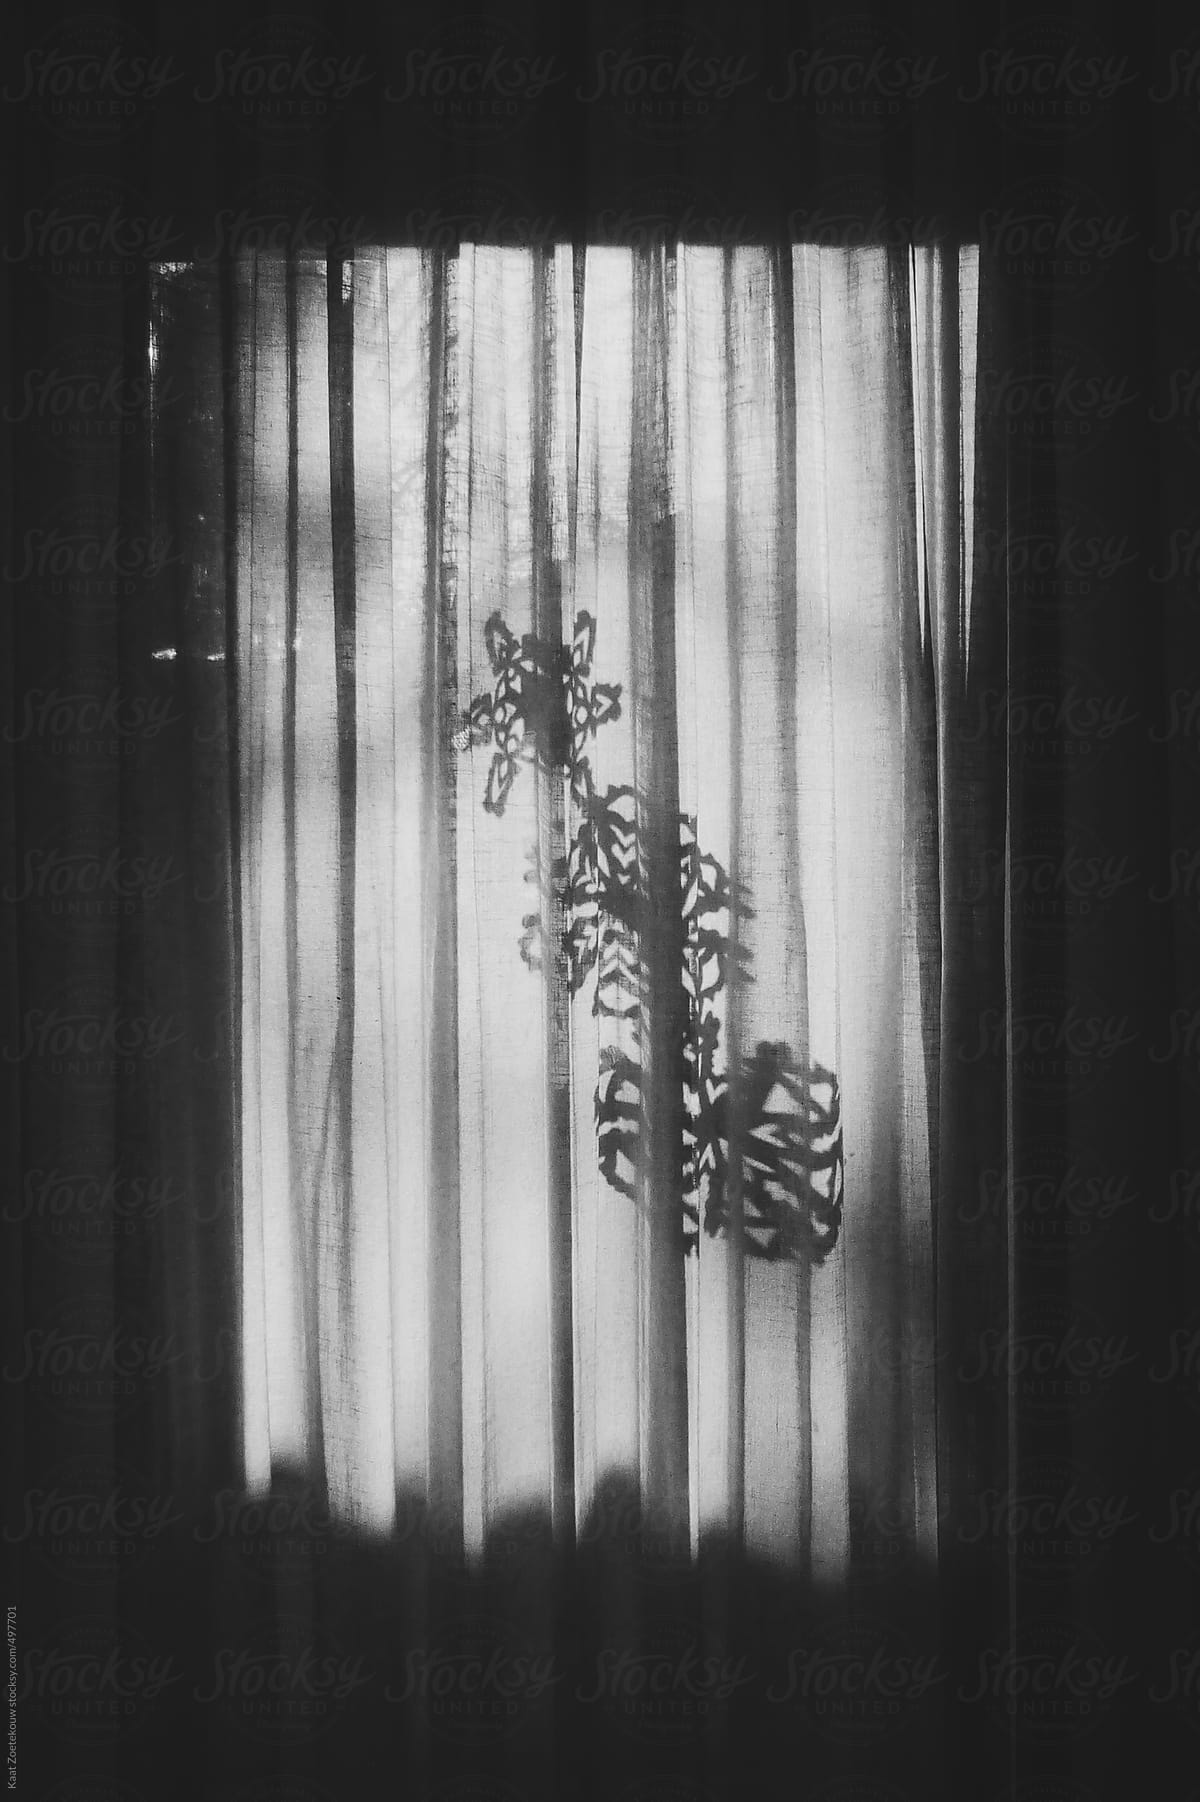 Backlit paper snowflakes behind a sheer curtain